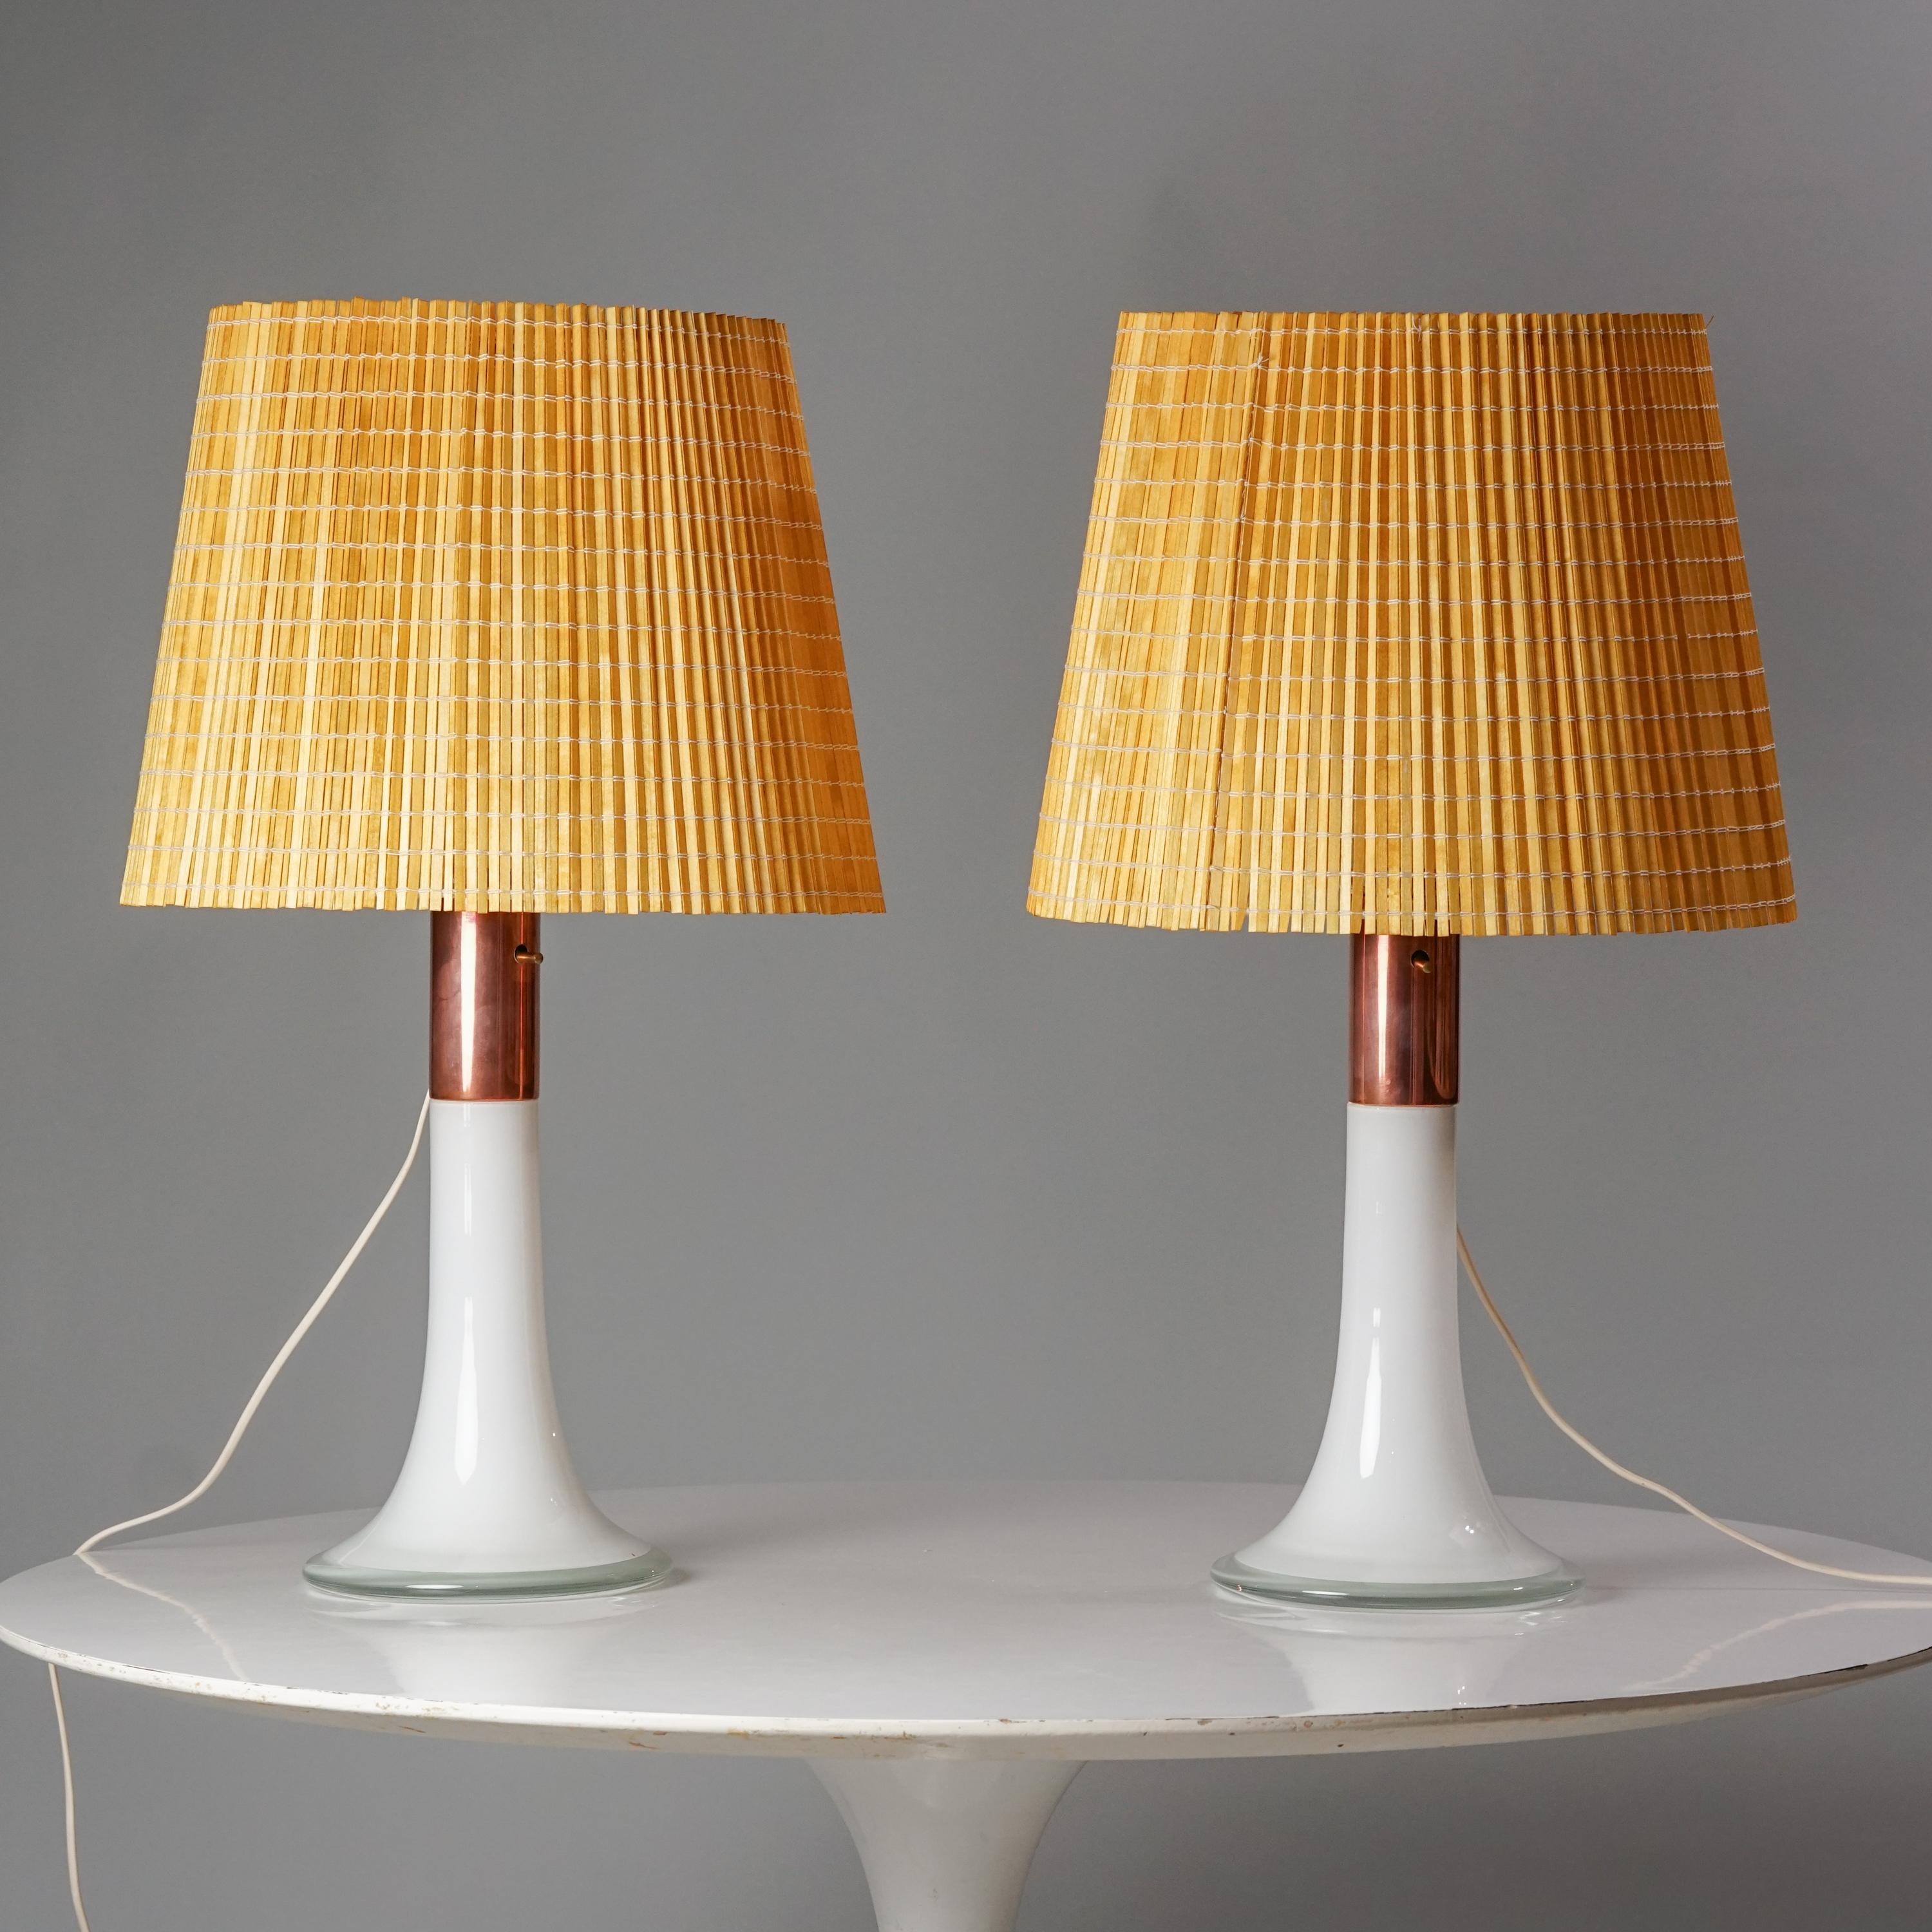 Finnish Pair of Lisa Johansson-Pape Glass Lamps With Wooden Slat Shades, Orno Oy, 1960s For Sale